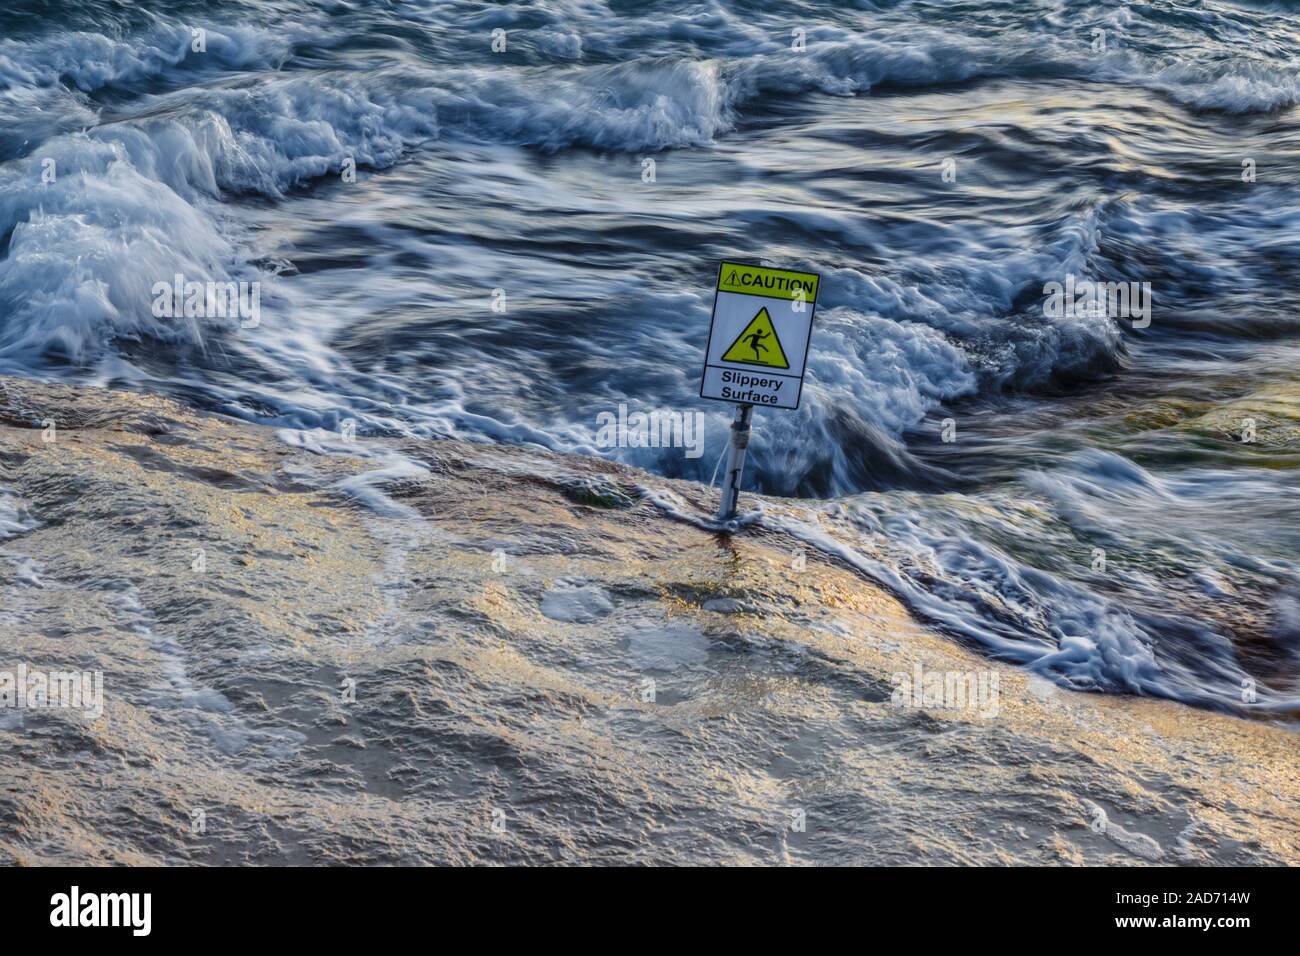 The sea swirls around a natural rock promenade with a sign warning of a slippery surface. Stock Photo